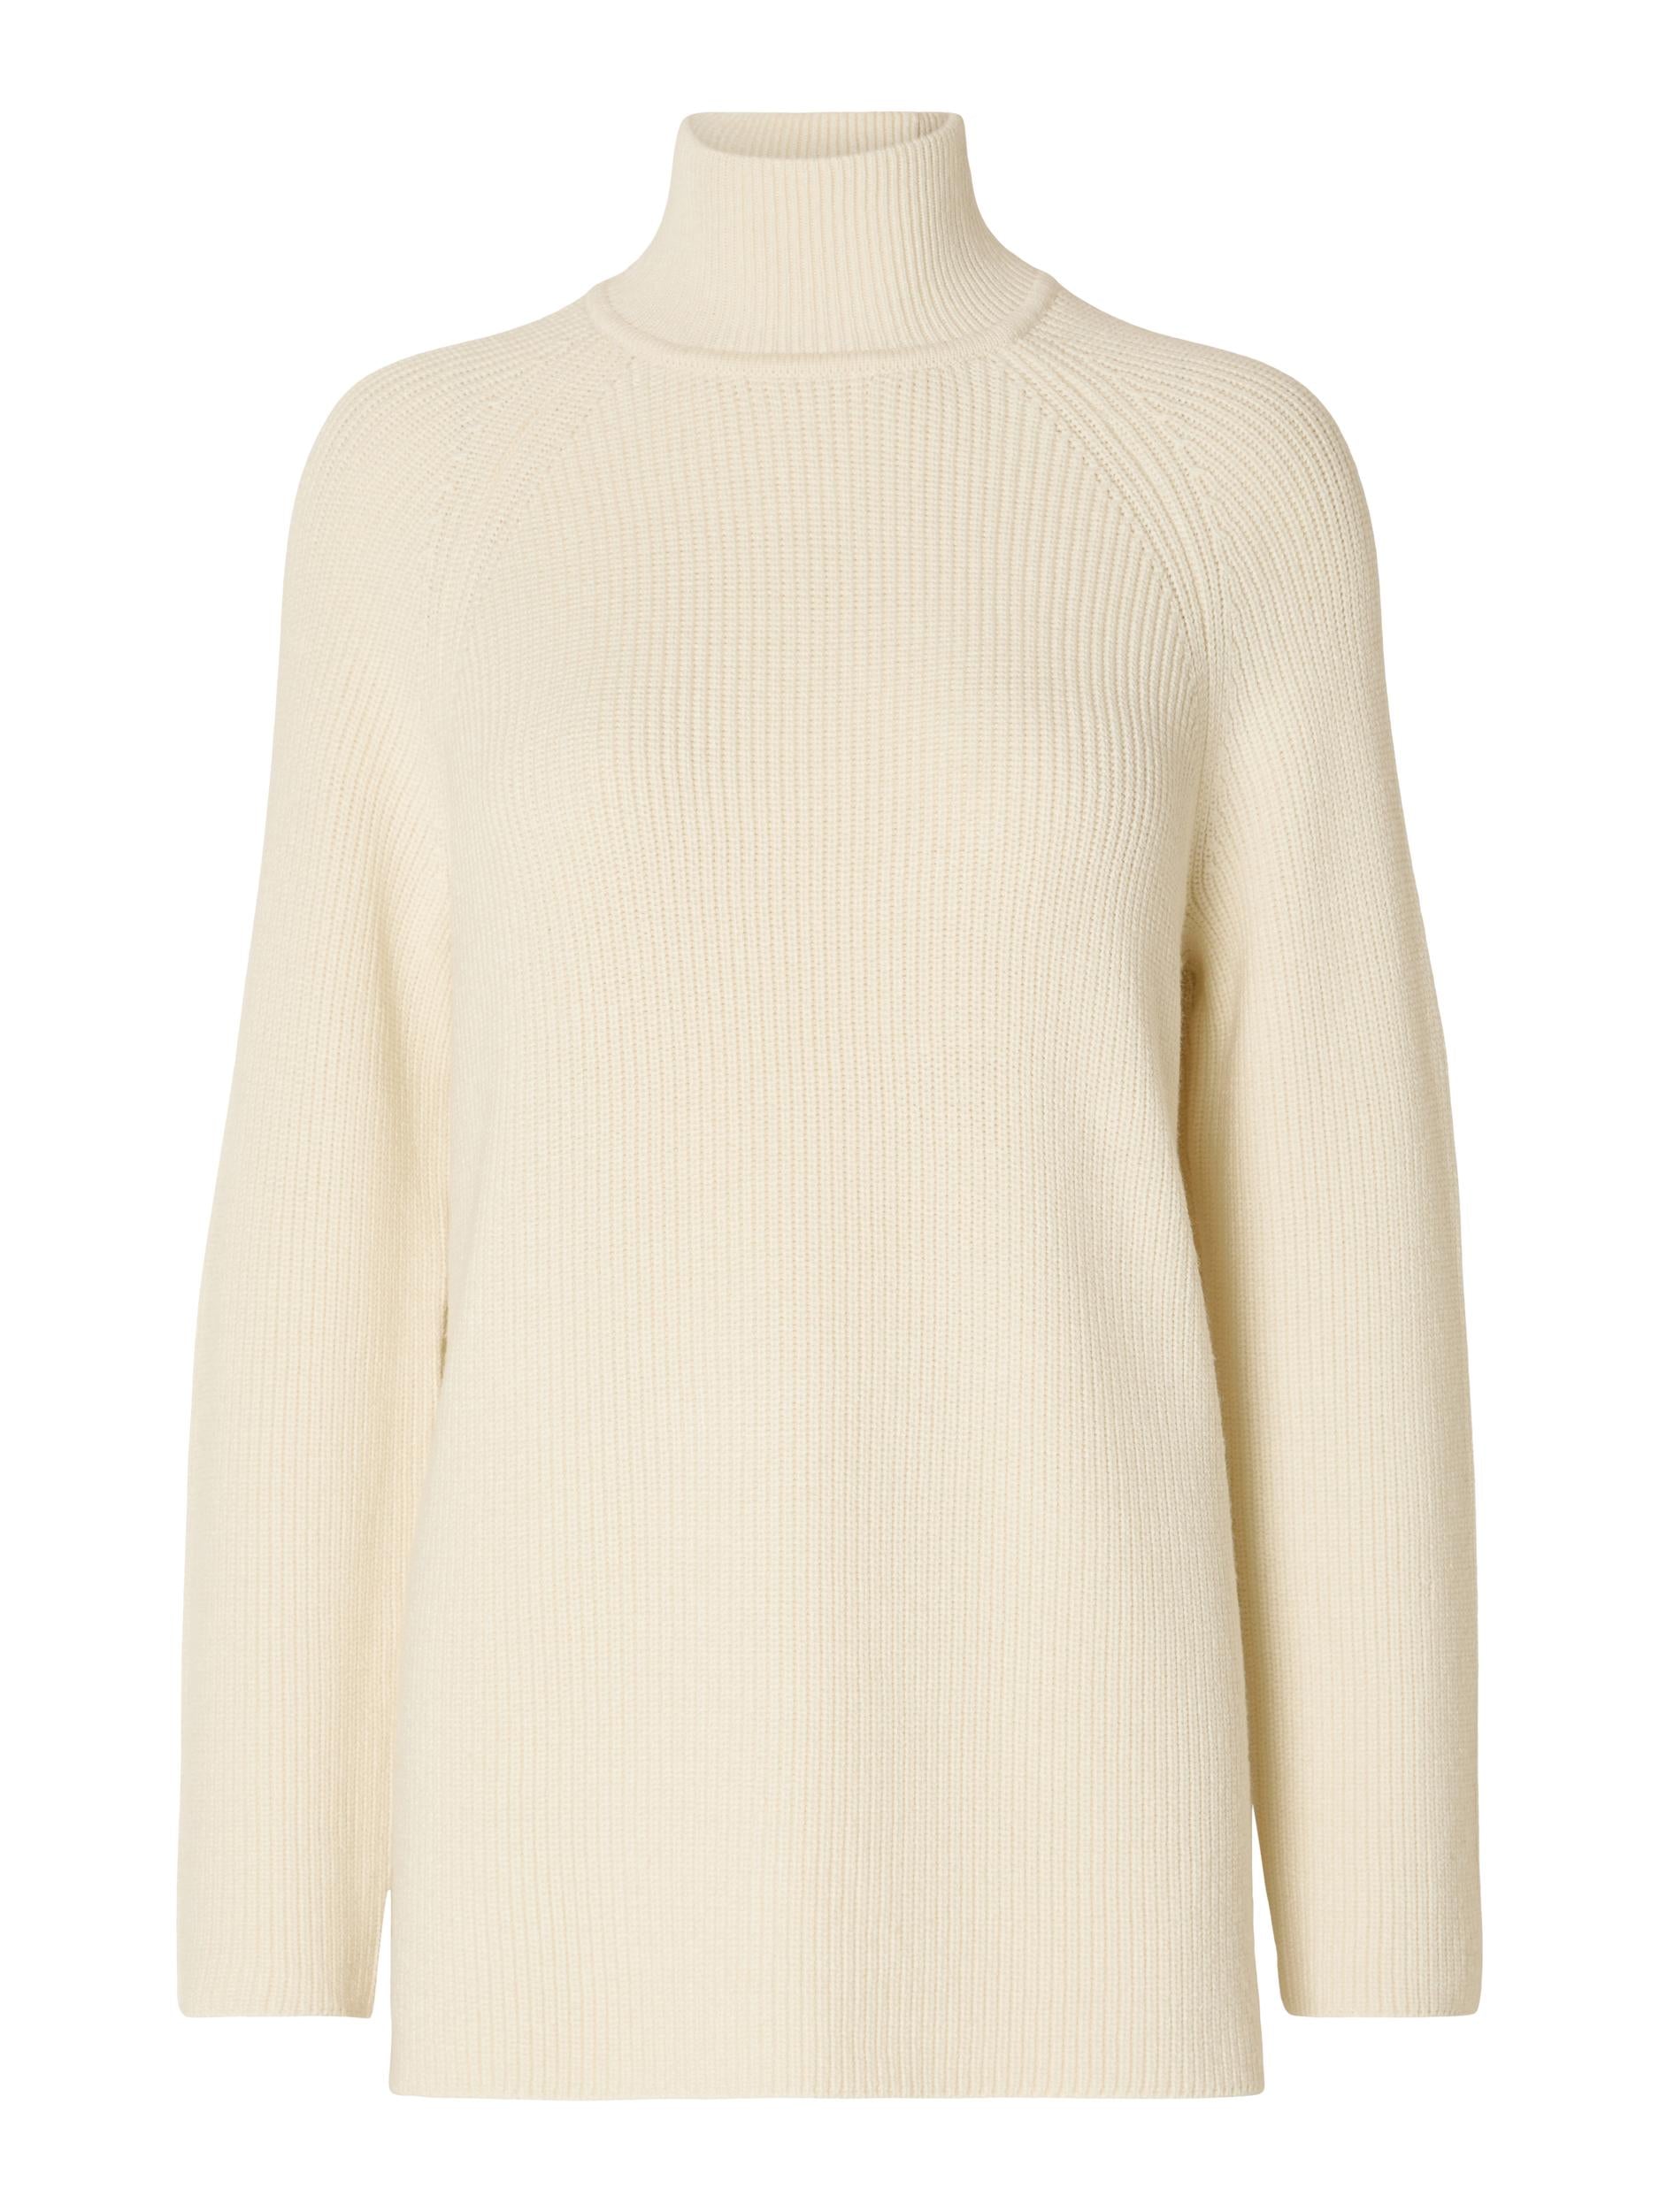 Selected Femme " Kamma" Long Knit Pullover creme